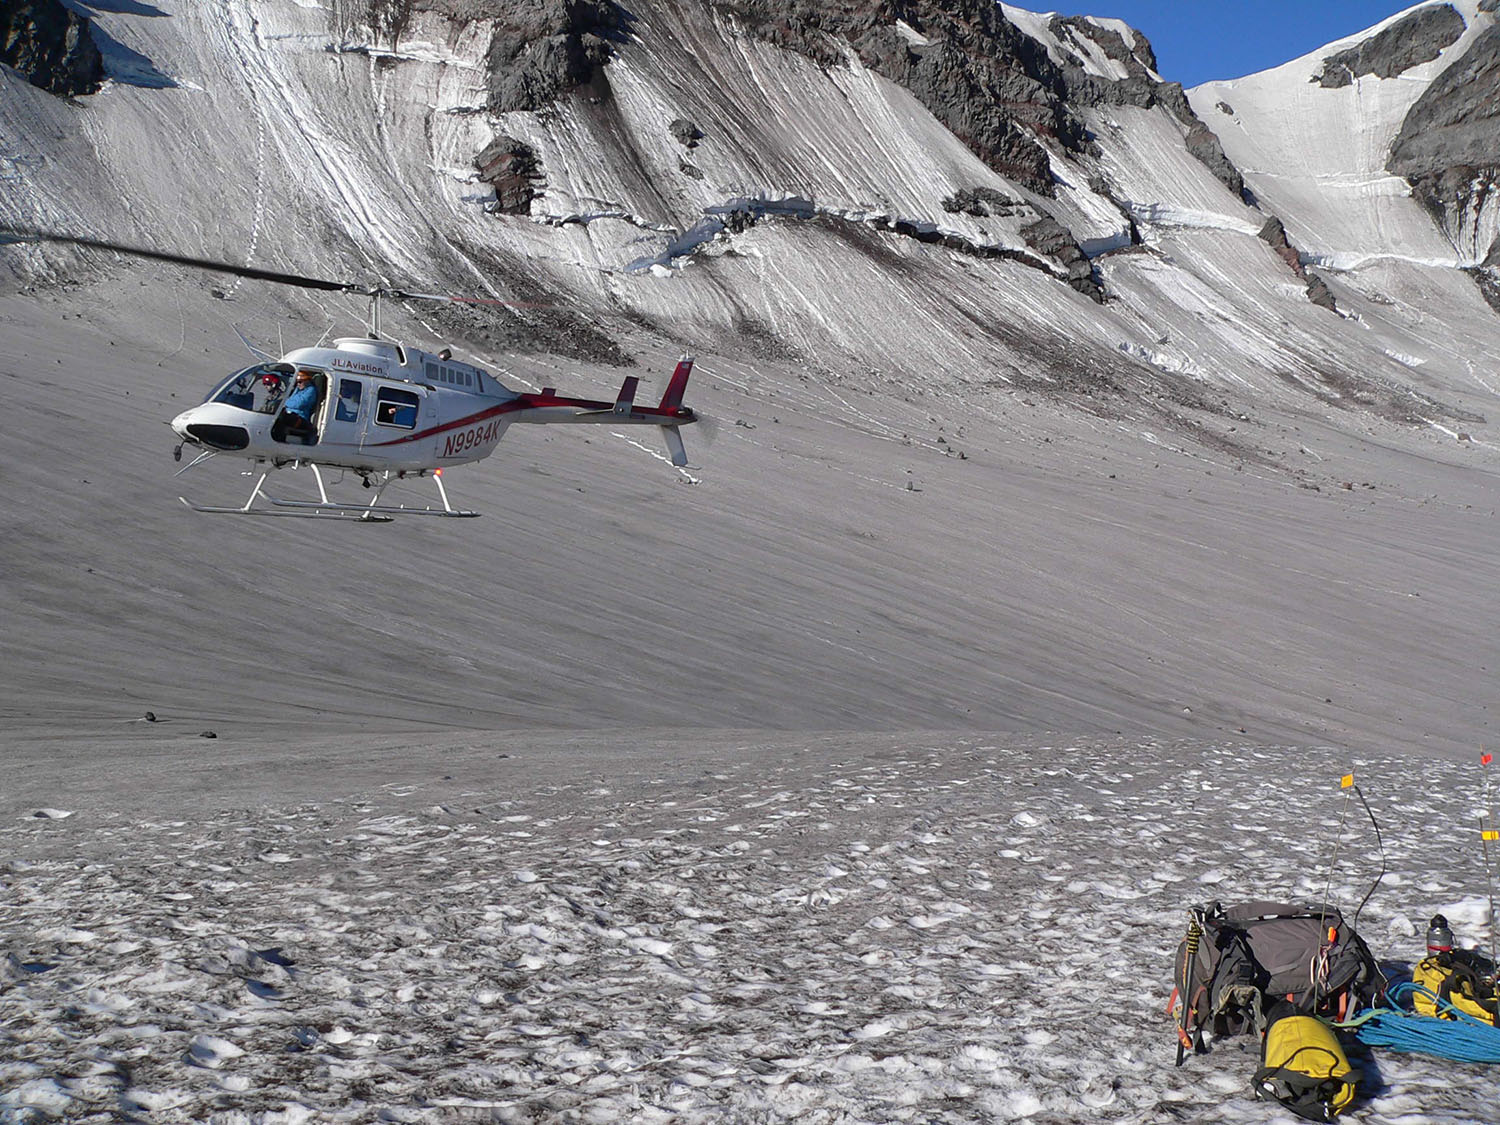 A look inside the crater on Mt. St. Helens, with a pile of research expedition equipment and the helicopter that took scientists to and from the crater.